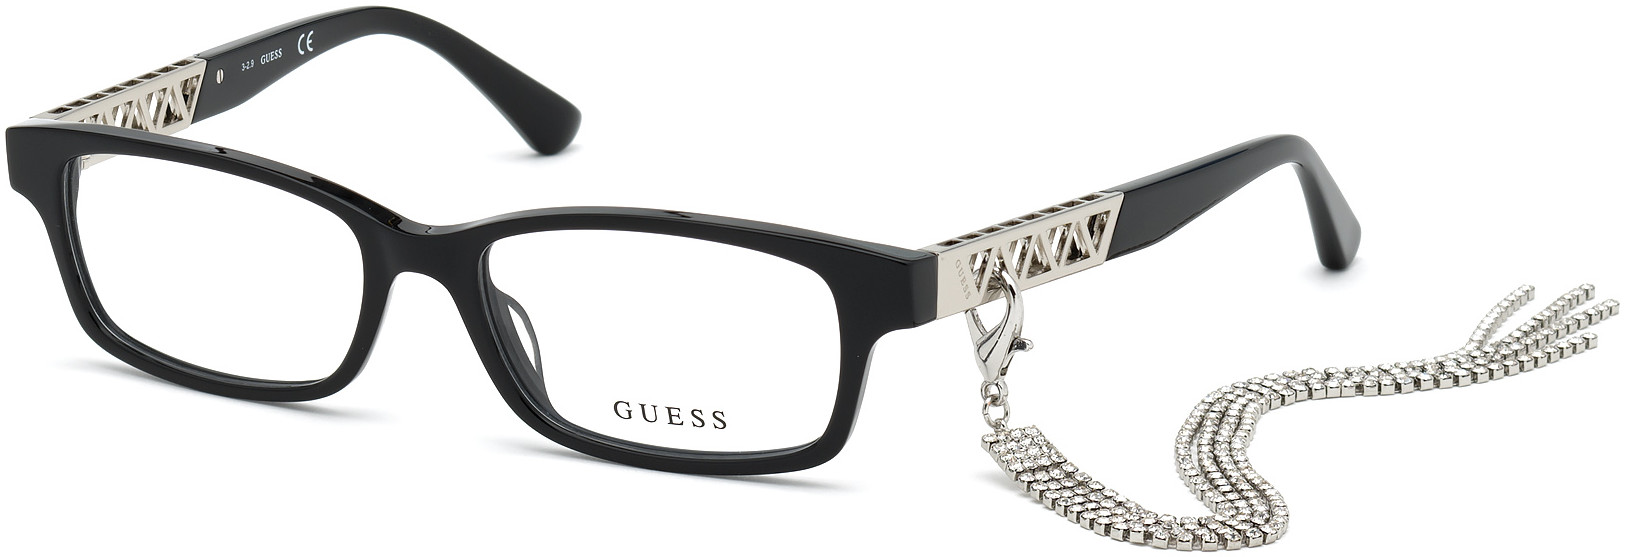 GUESS 2785